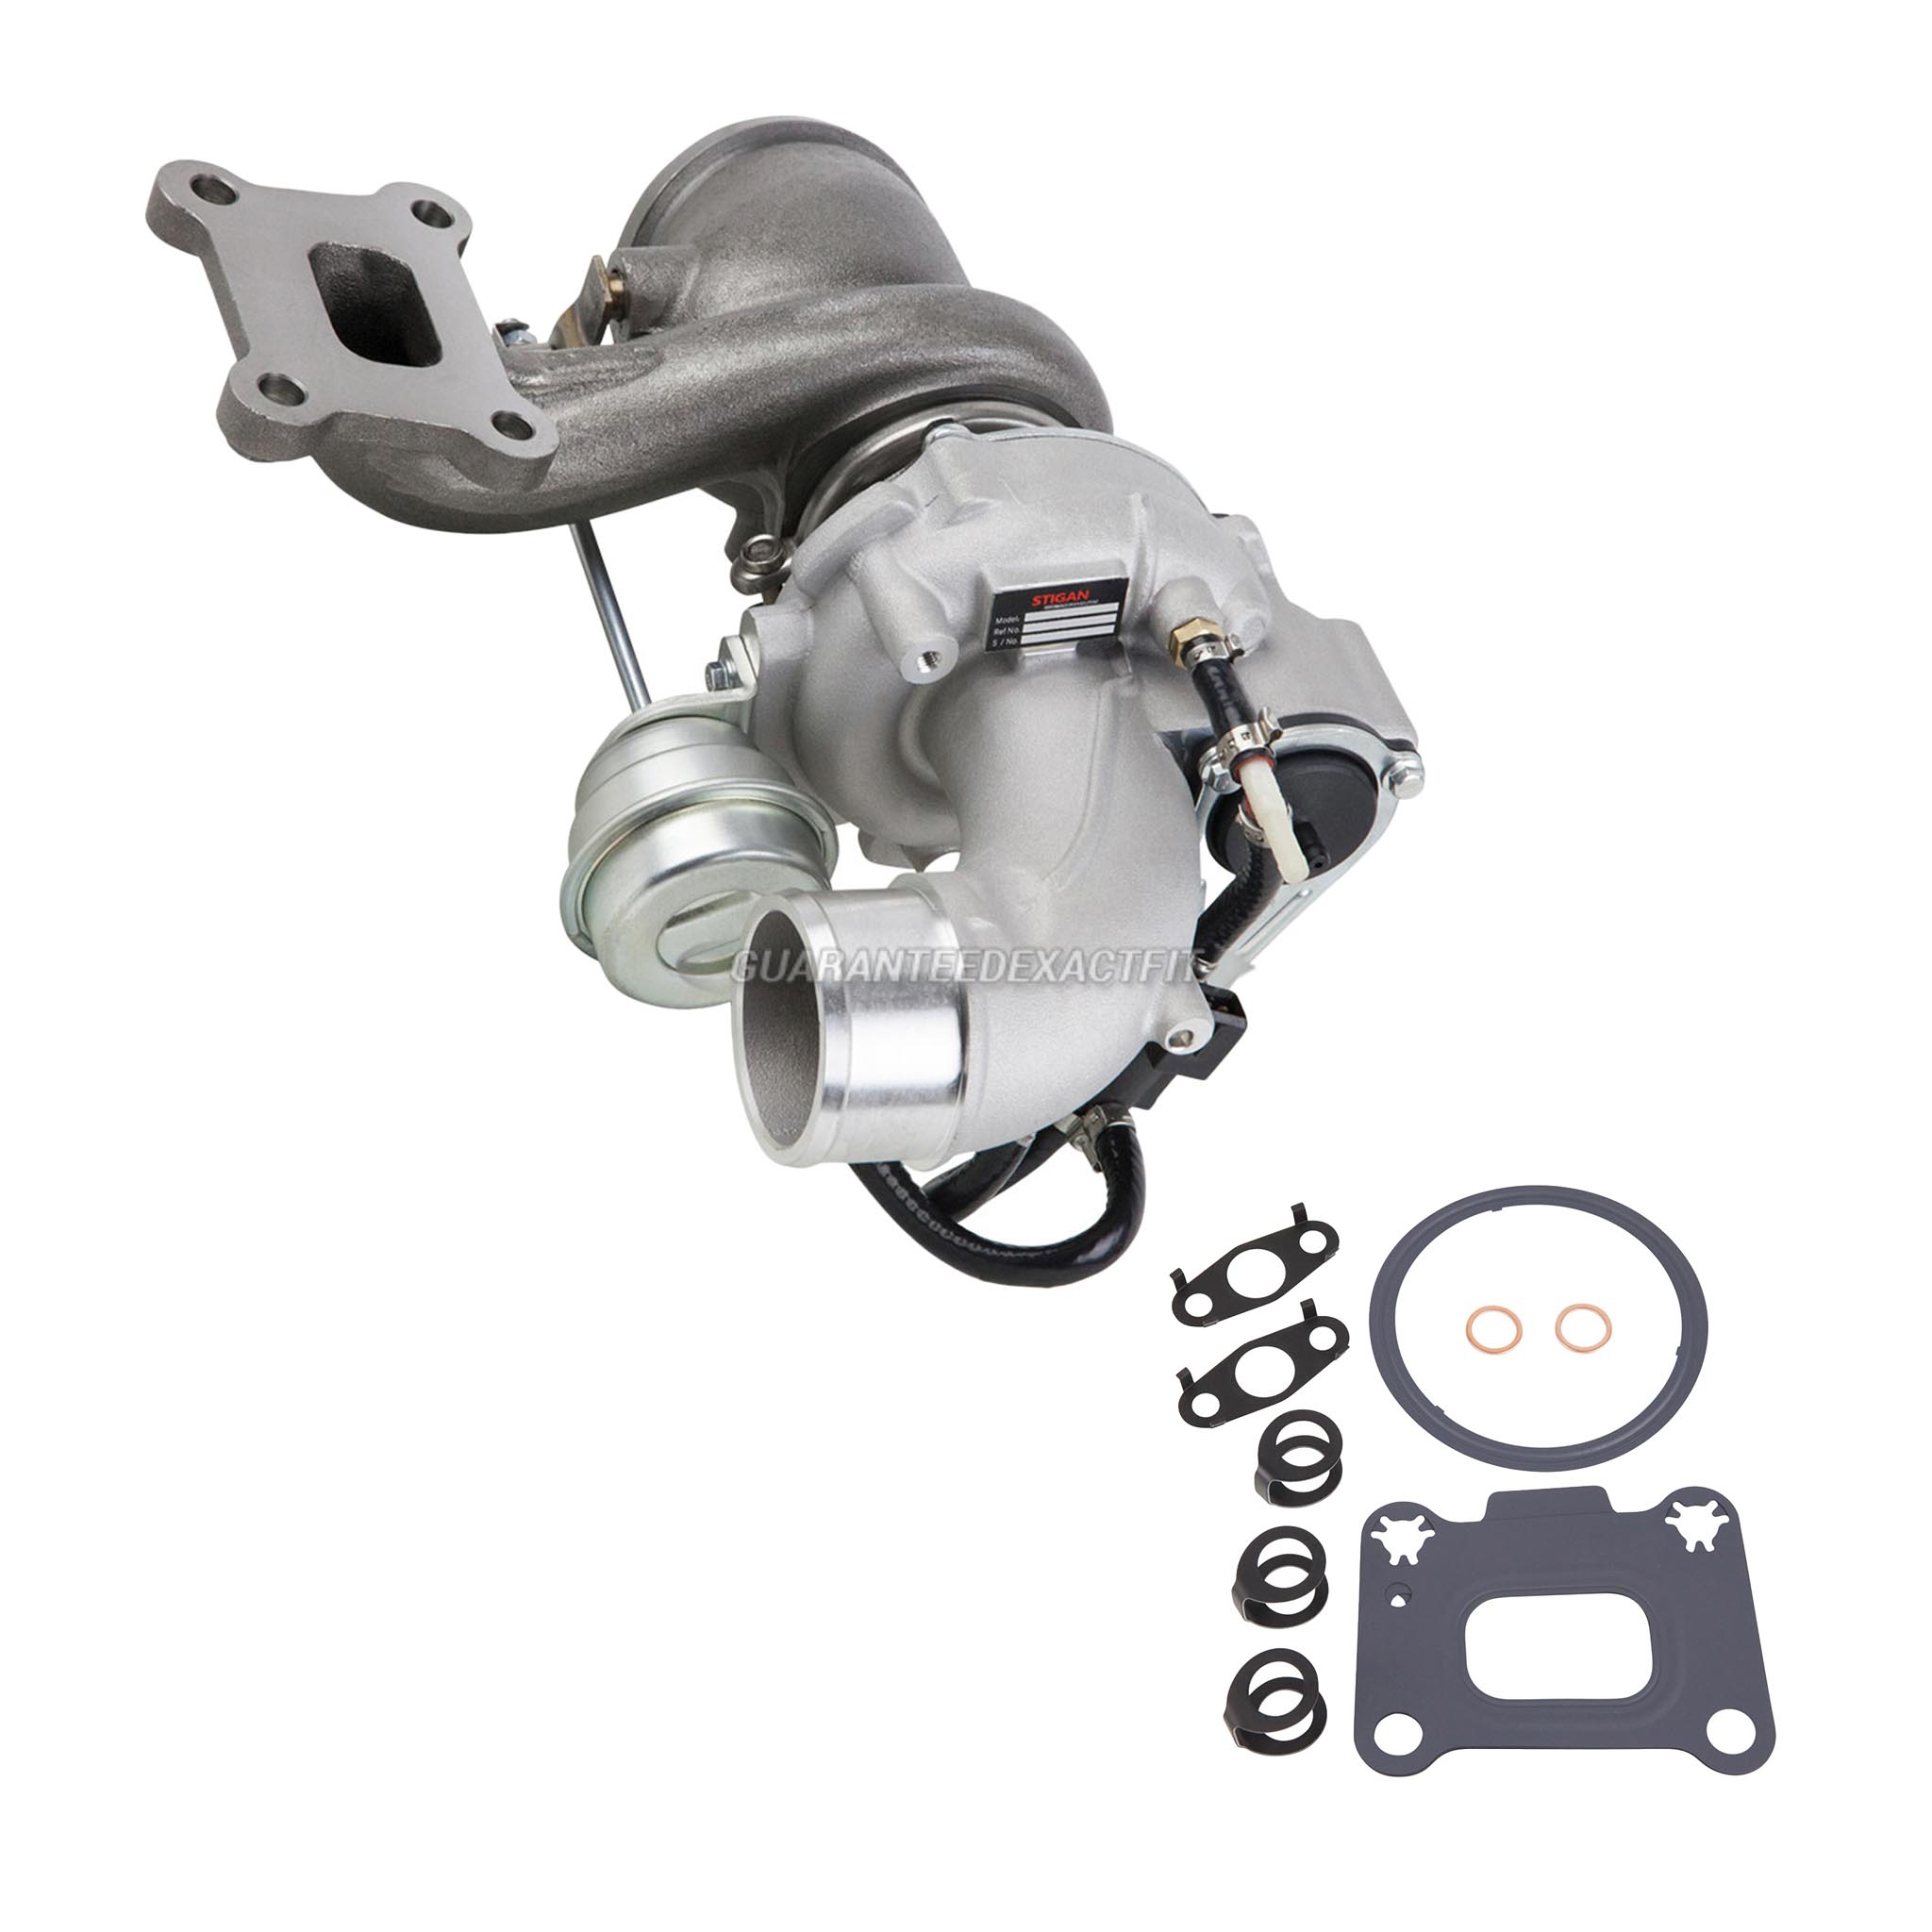  Lincoln mkz turbocharger and installation accessory kit 